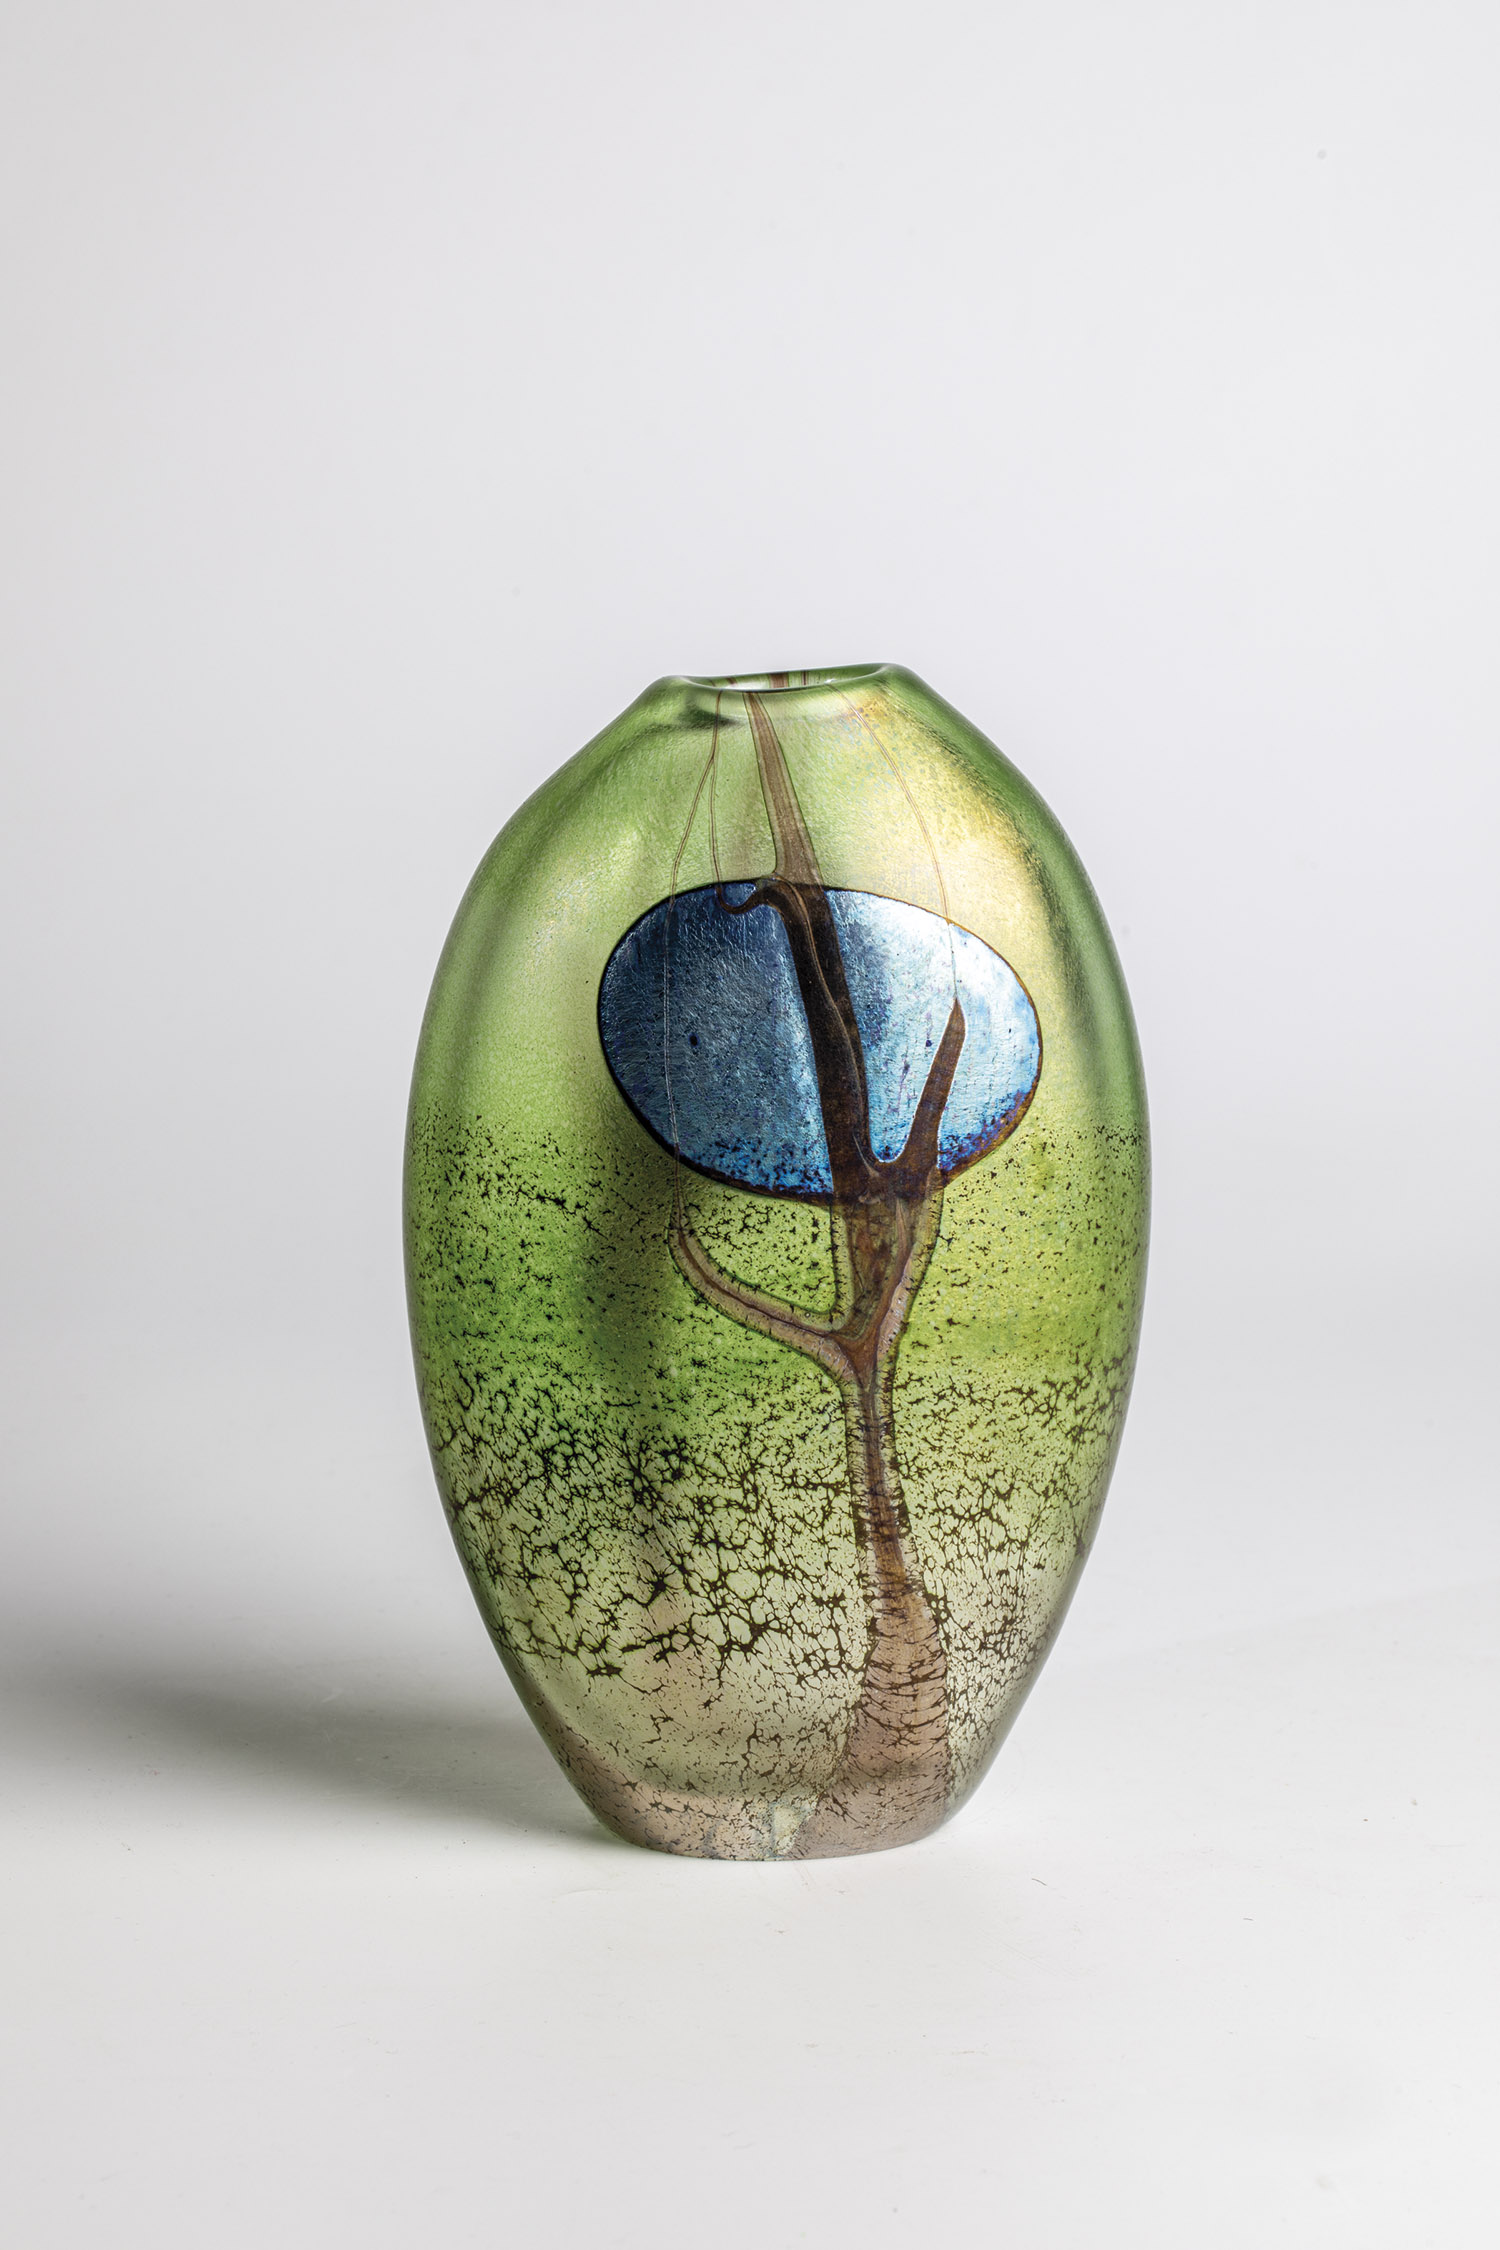 VASE Norman Stuart-Clarke, 1987 Colourless glass with colour fusion, strongly iridescent. Signed and